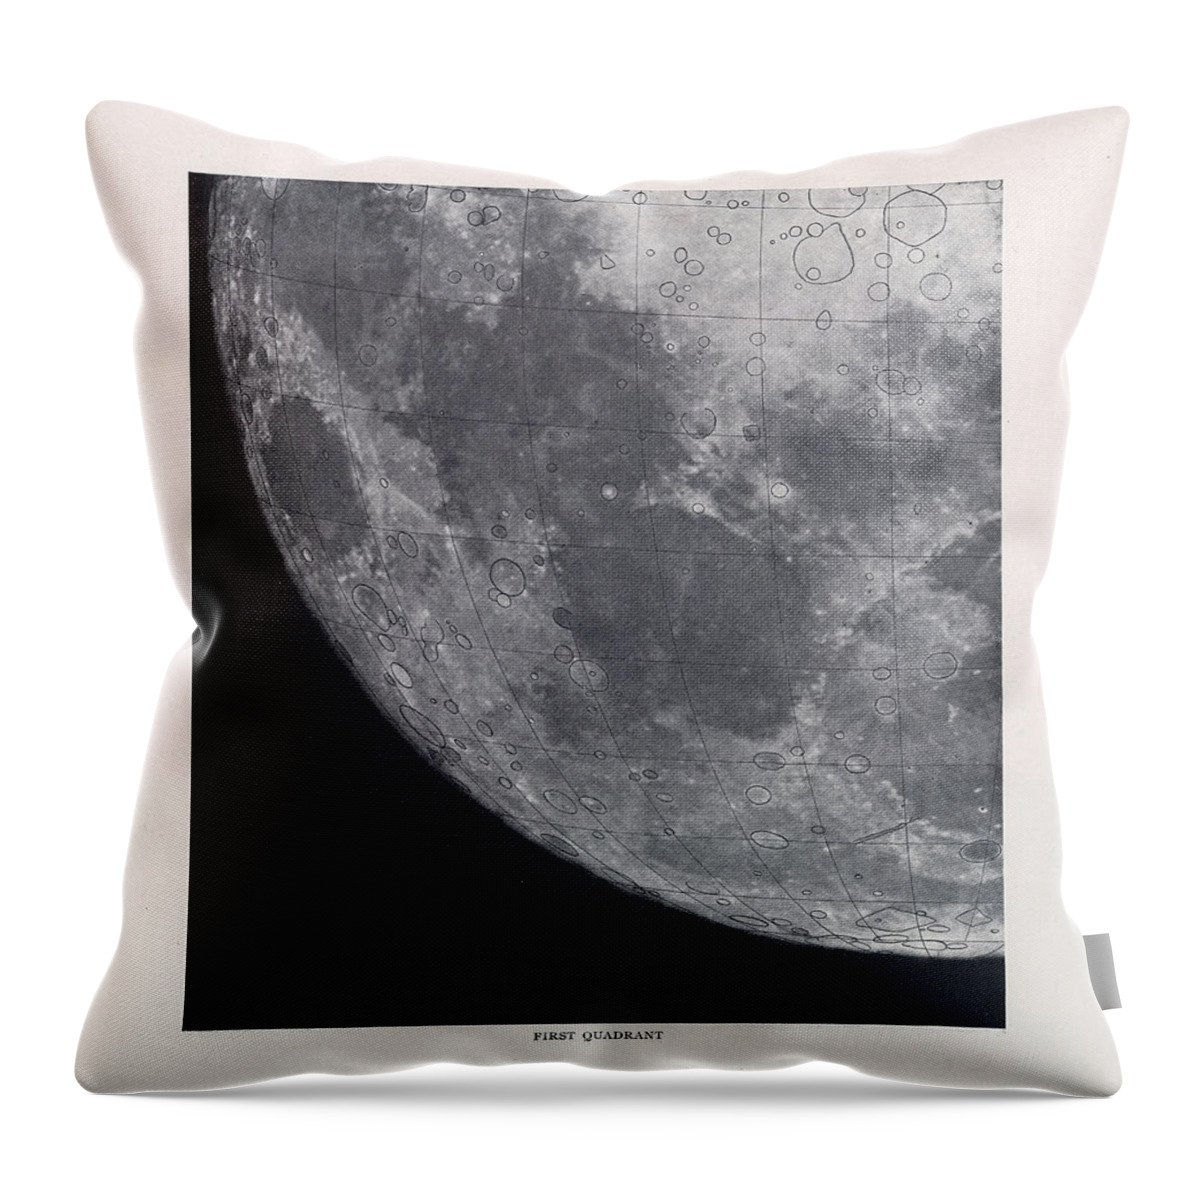 Celestial Chart Throw Pillow featuring the drawing First Quadrant - Surface of the moon - Lunar Surface - Selenographia - Celestial Chart by Studio Grafiikka